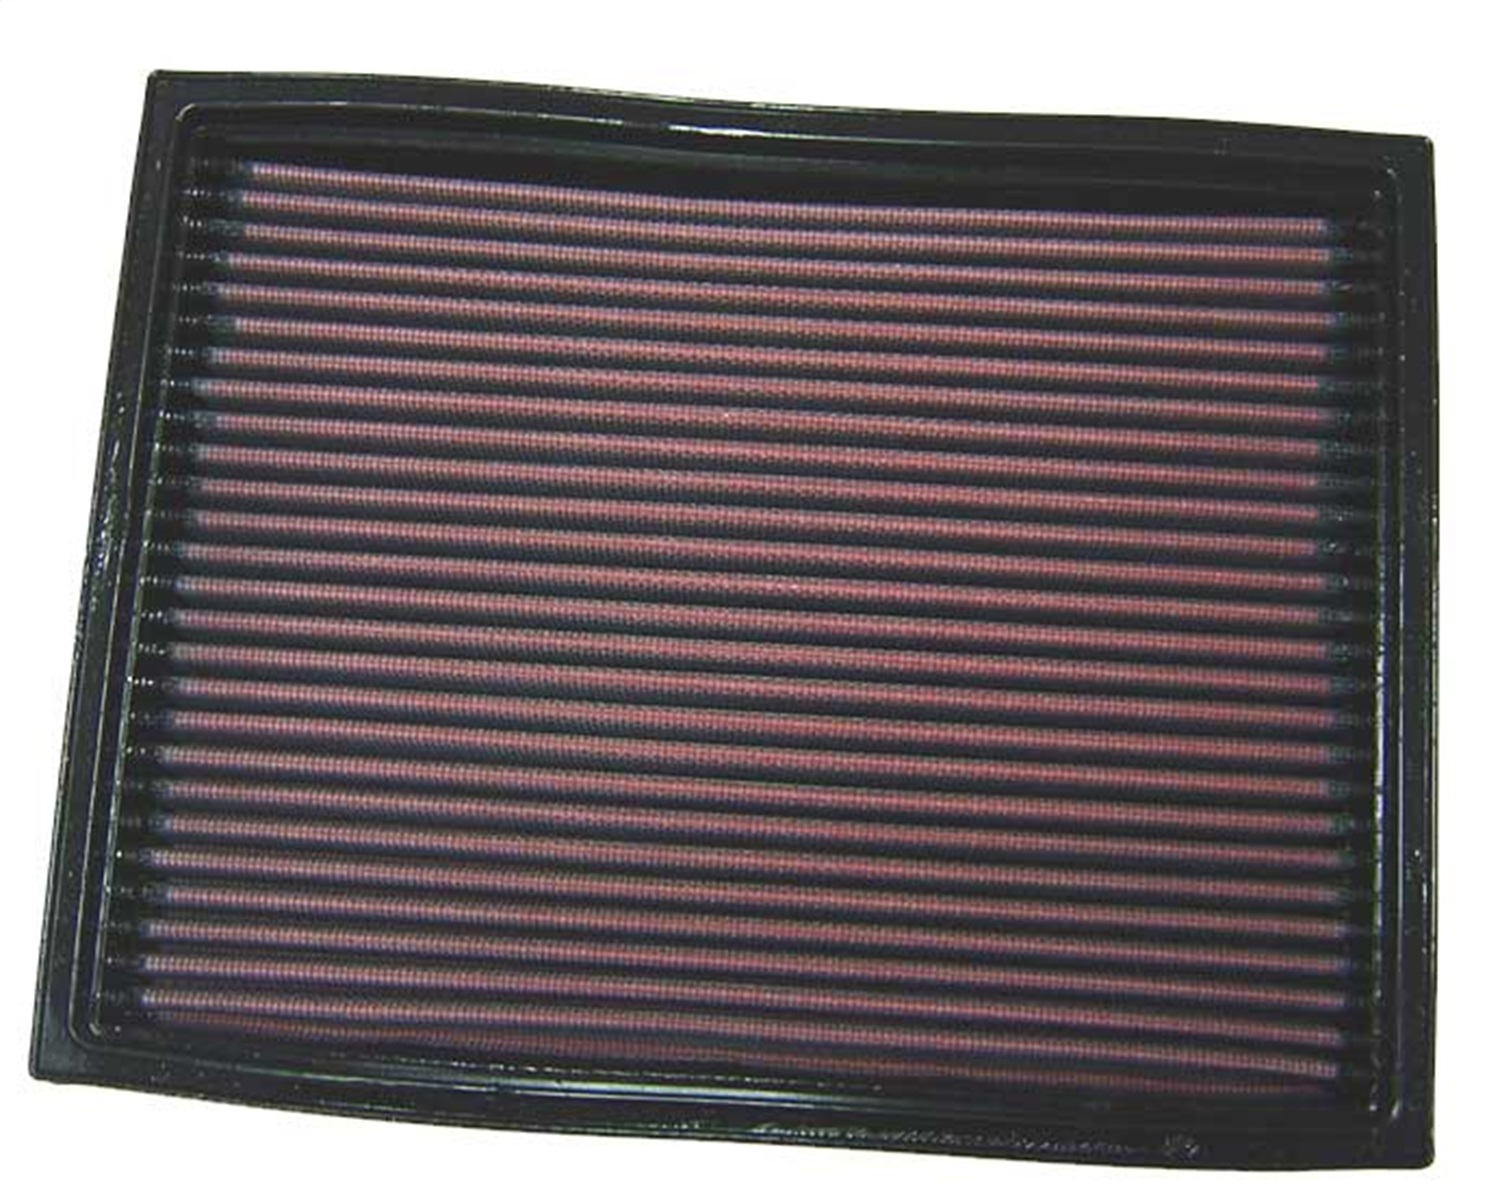 K&N Filters K&N Filters 33-2737 Air Filter Fits 94-99 Discovery Range Rover